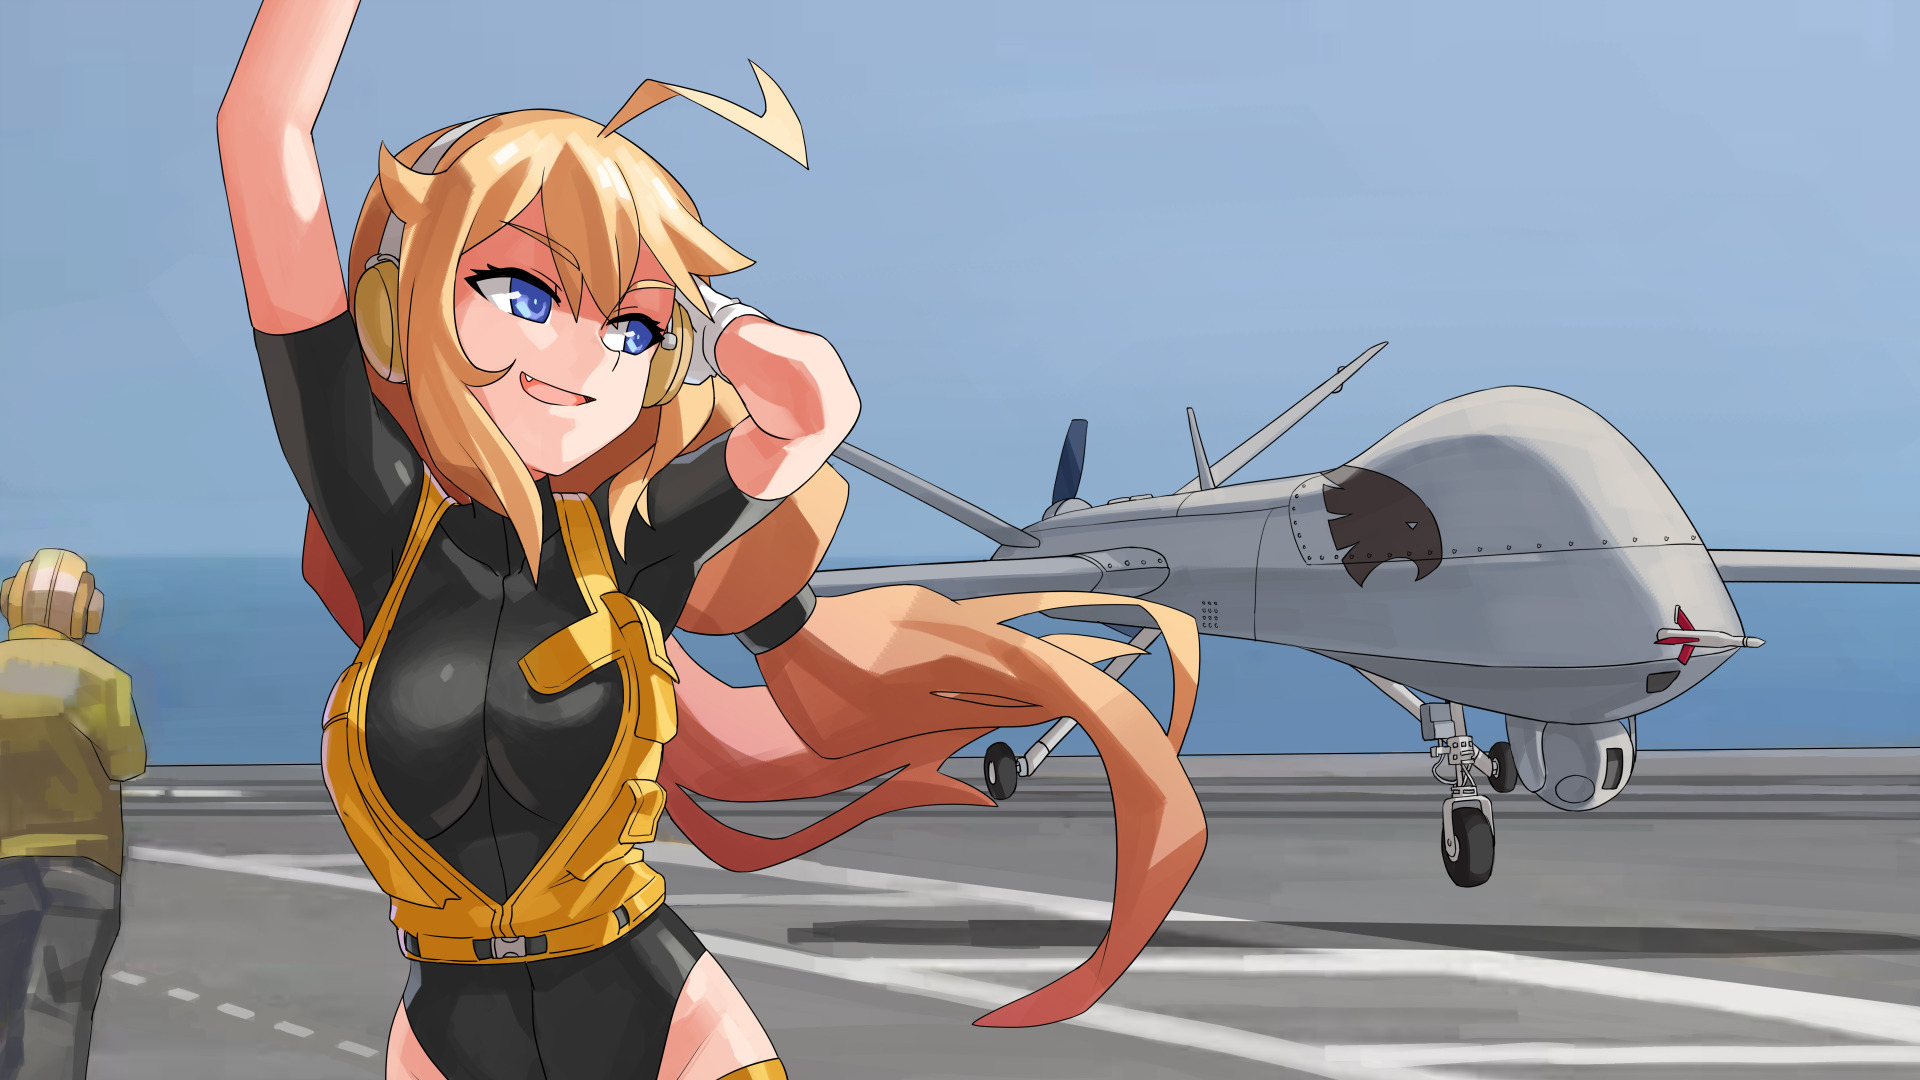 Wallpaper | Anime | photo | picture | clouds, Fighter, aviation, the sky